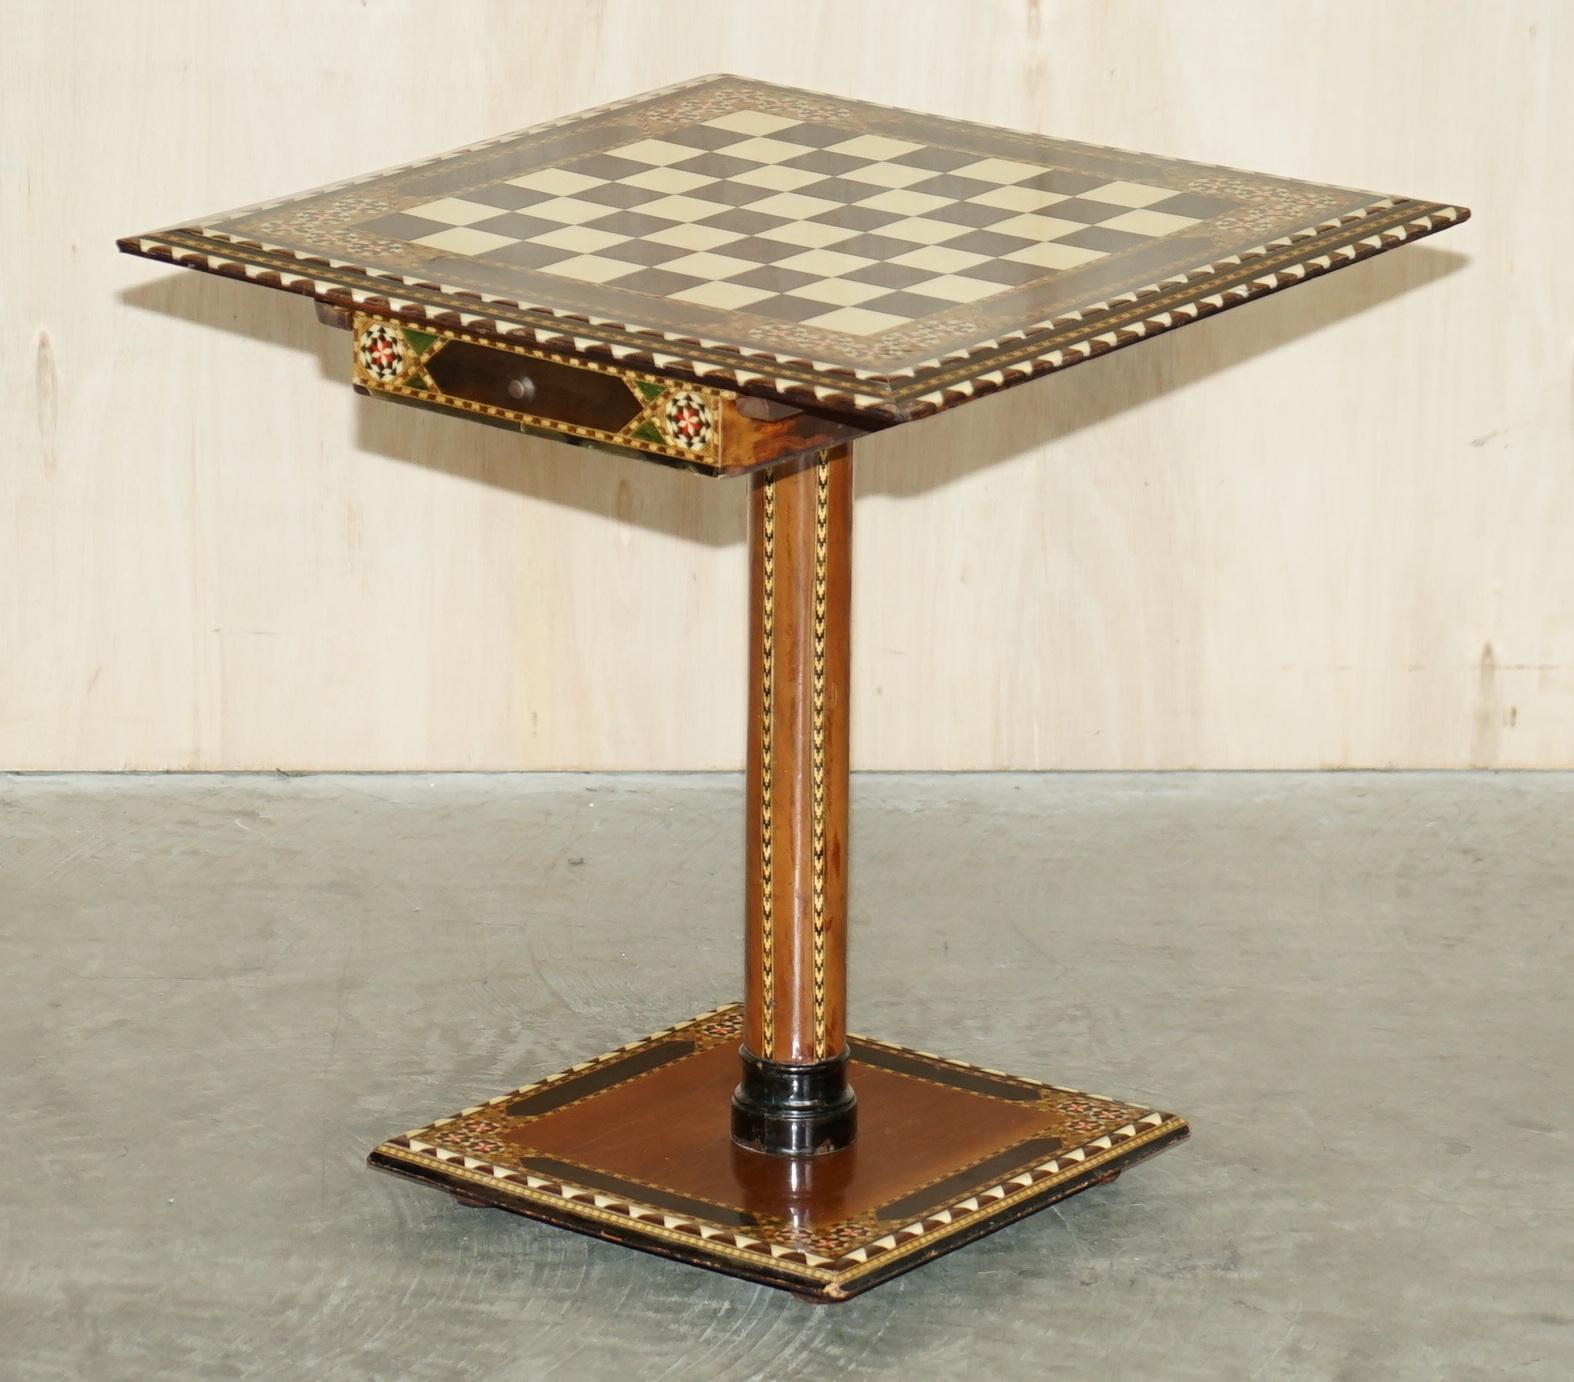 We are delighted to offer for sale this exquisite Anglo Indian Chess Board games table

A very well made and decorative piece, this table is of a Regency design, made during the English occupation of India for the export market

The table has